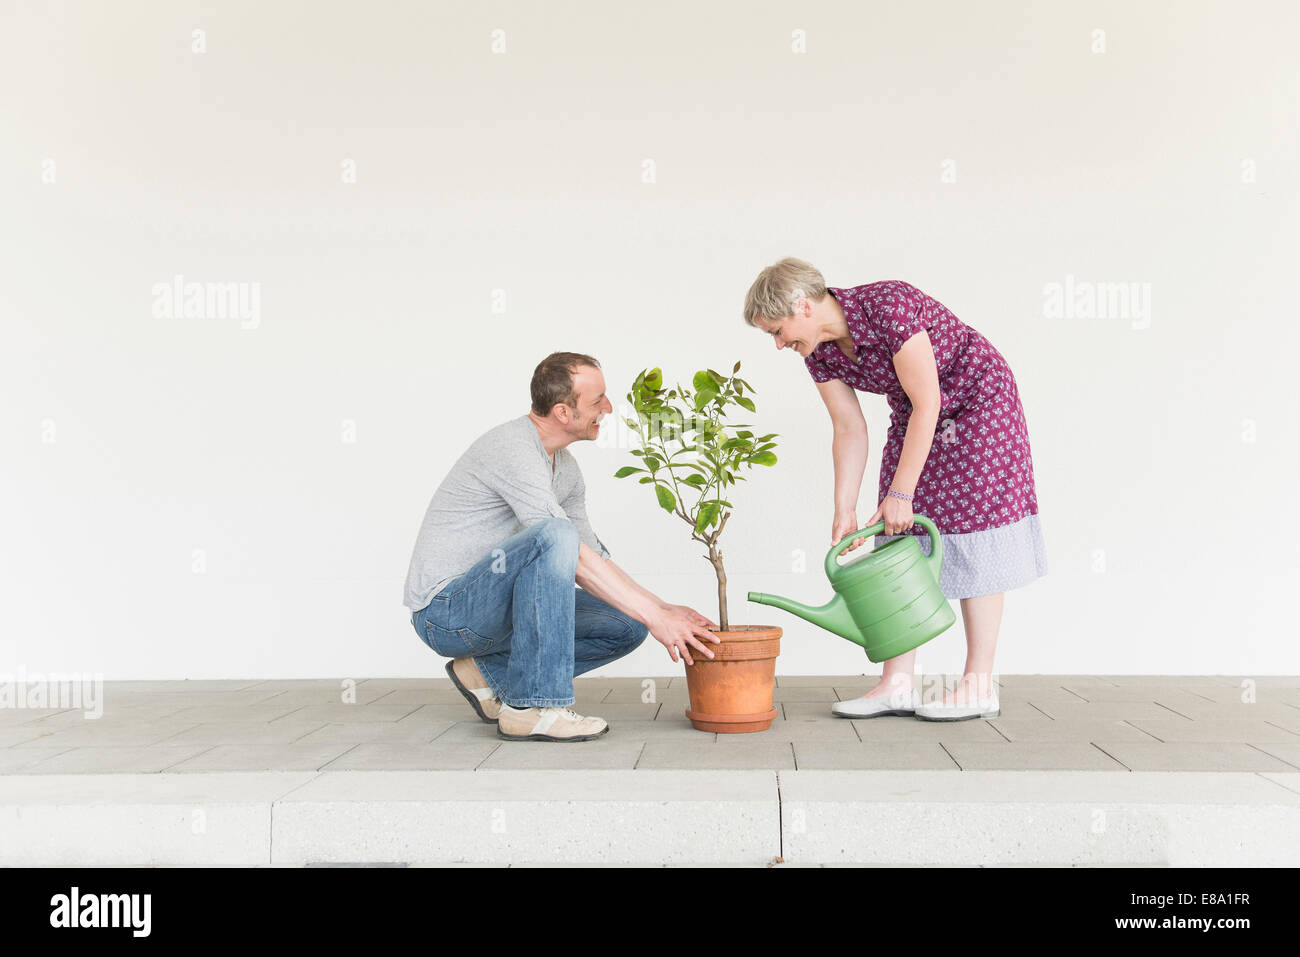 Mature couple caring for little tree, smiling Stock Photo